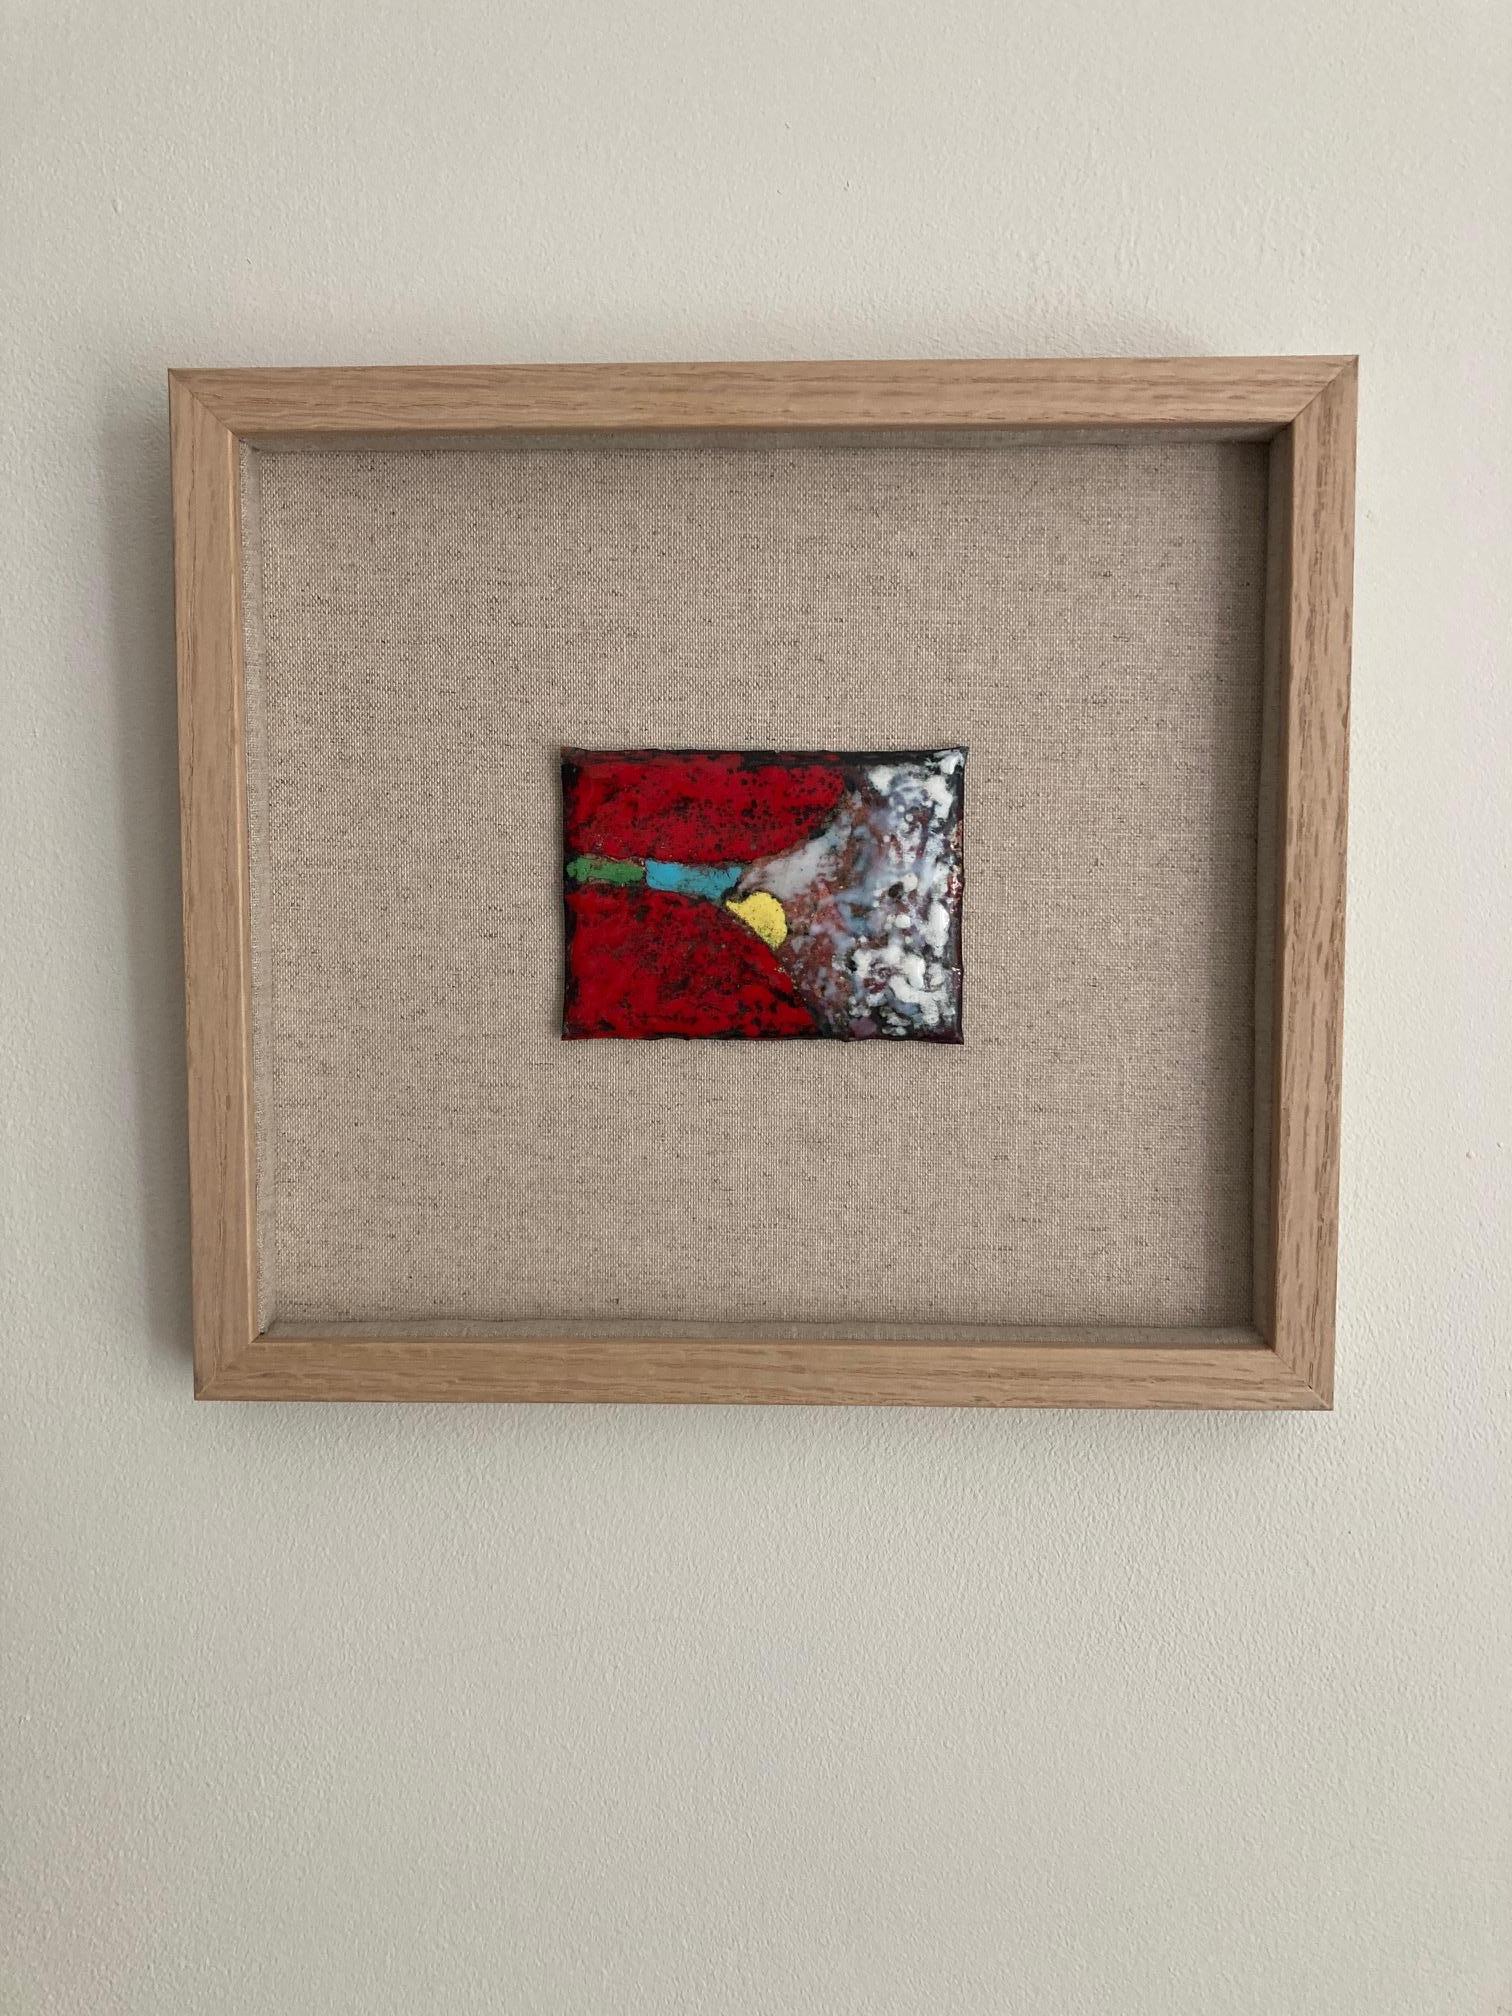 An exquisite small abstract enamel on copper painting. Remounted and framed on linen backed board. Fabulous colours. A highly decorative period work of art.